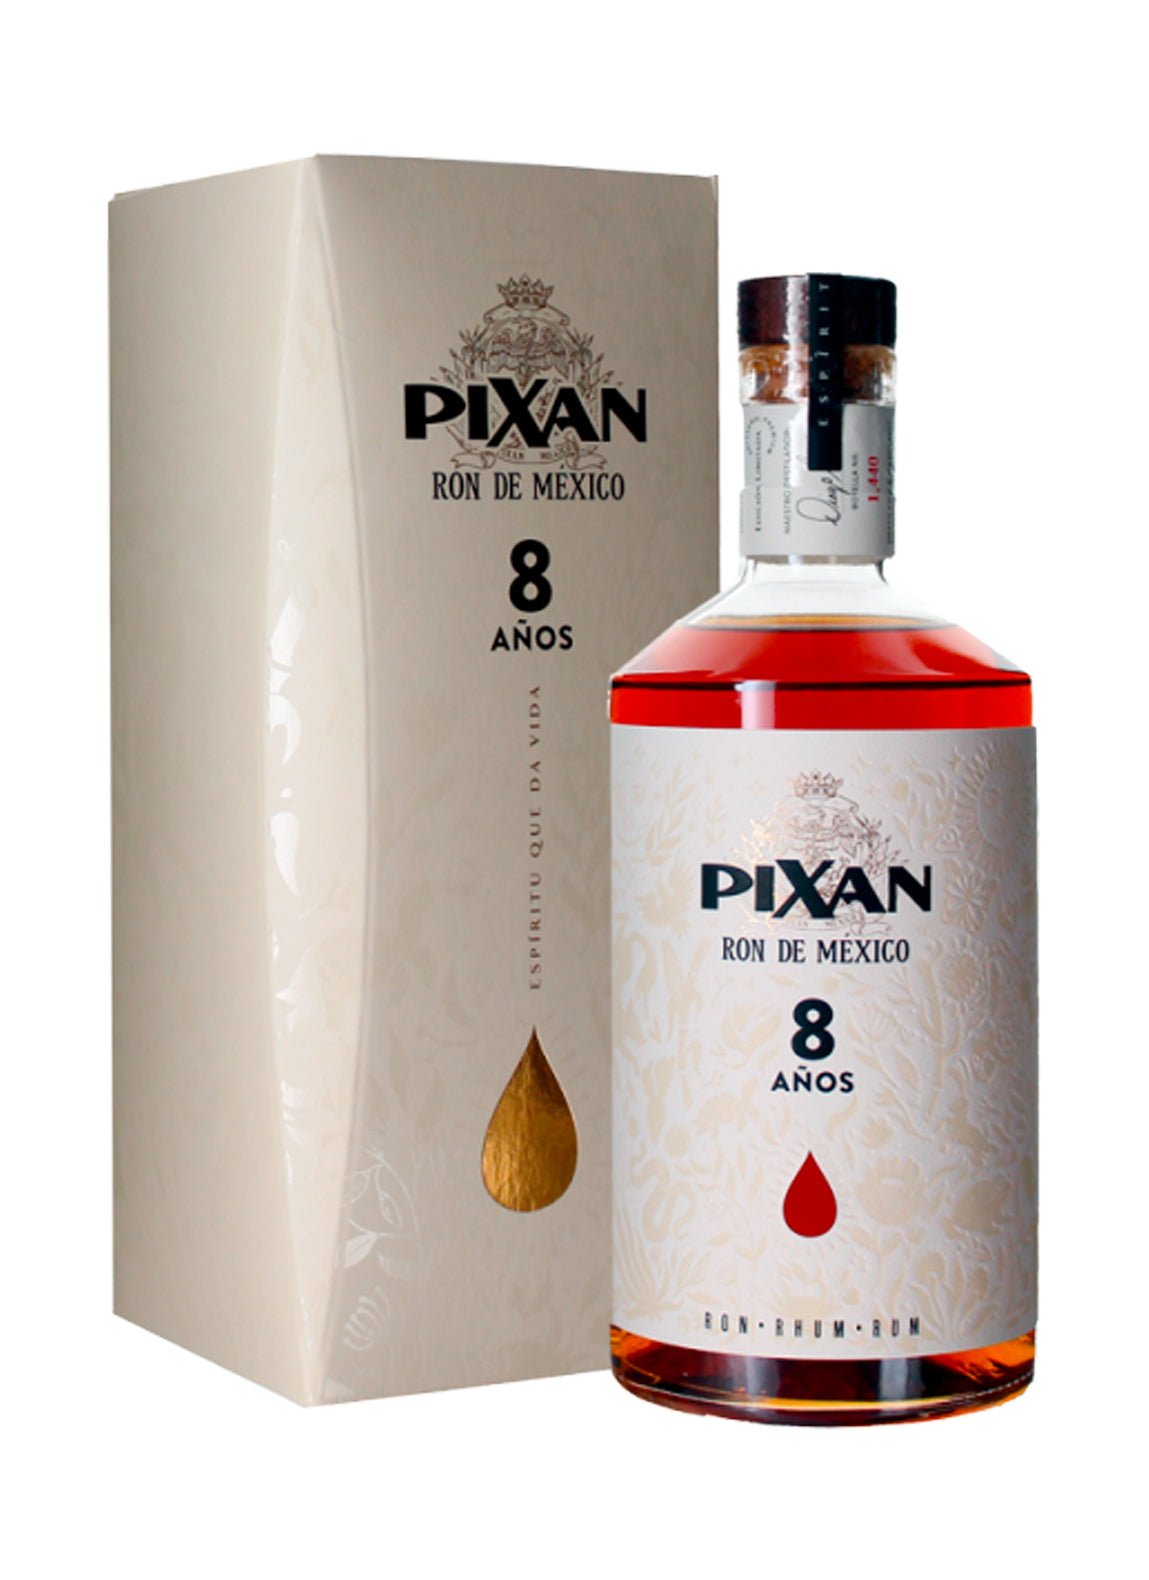 Pixan 8 years Mexican Rum 40% 700ml | Rum | Shop online at Spirits of France